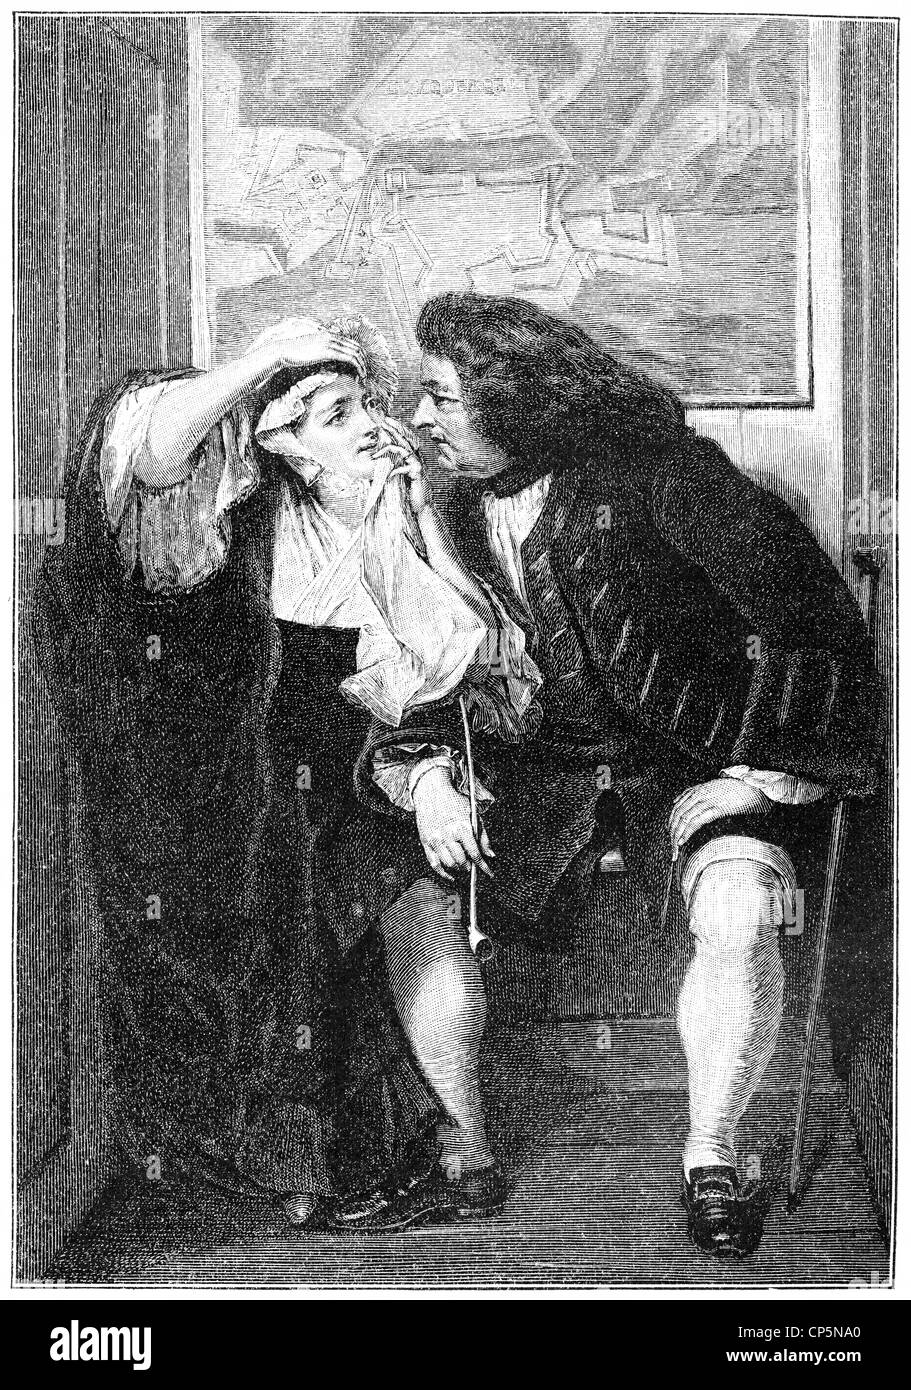 Uncle Toby and Widow Wadman, from The Life and Opinions of Tristram Shandy, Gentleman by Laurence Sterne, 1713 - 1768 Stock Photo